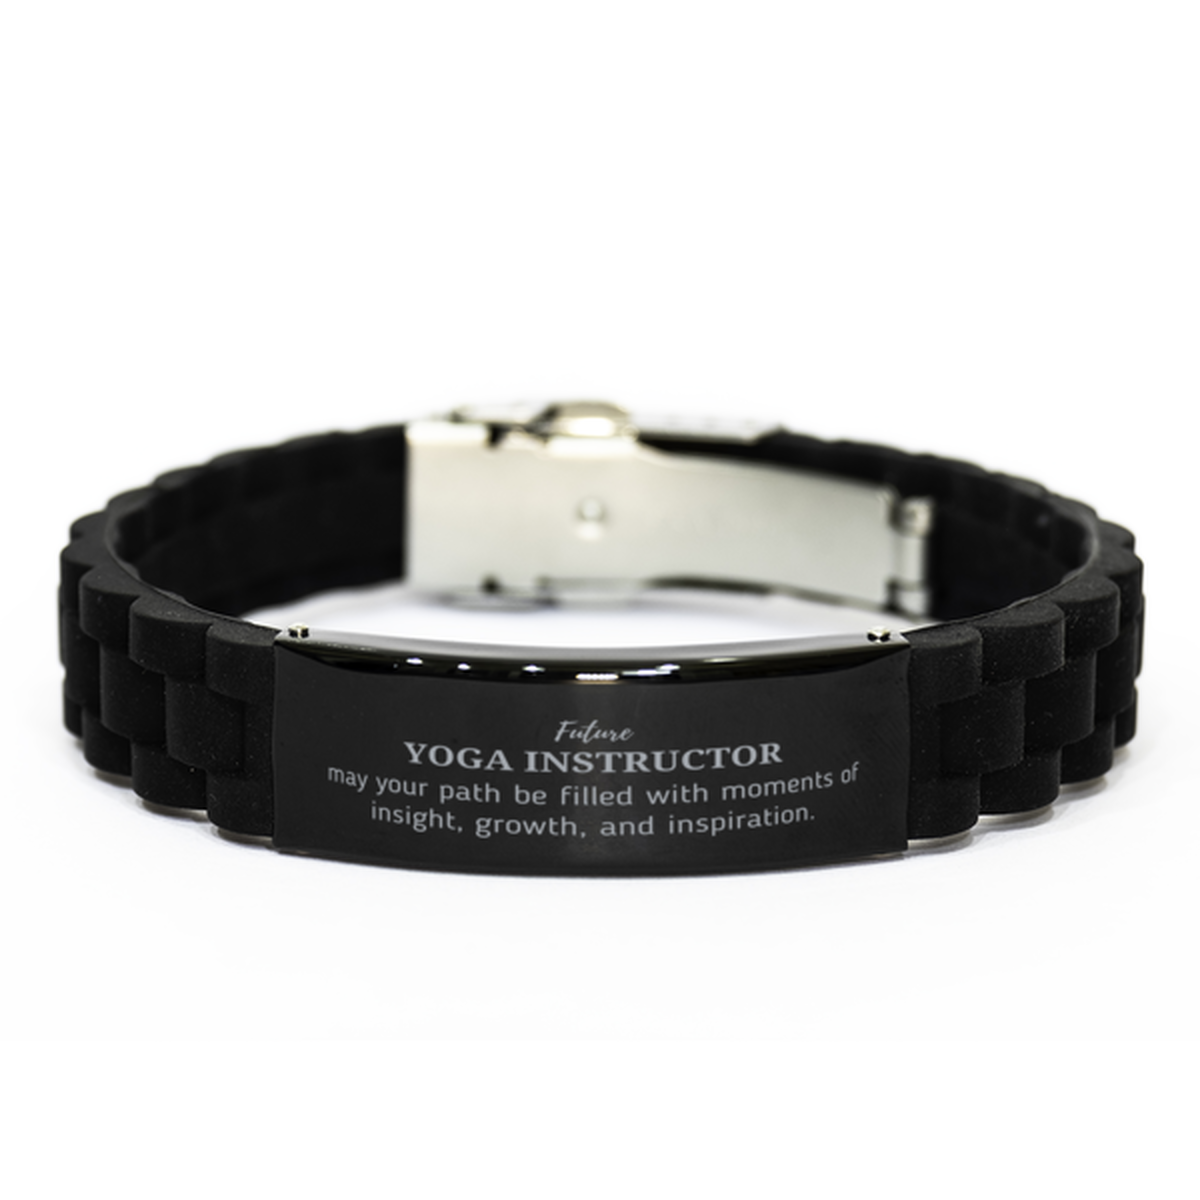 Future Yoga Instructor Gifts, May your path be filled with moments of insight, Graduation Gifts for New Yoga Instructor, Christmas Unique Black Glidelock Clasp Bracelet For Men, Women, Friends